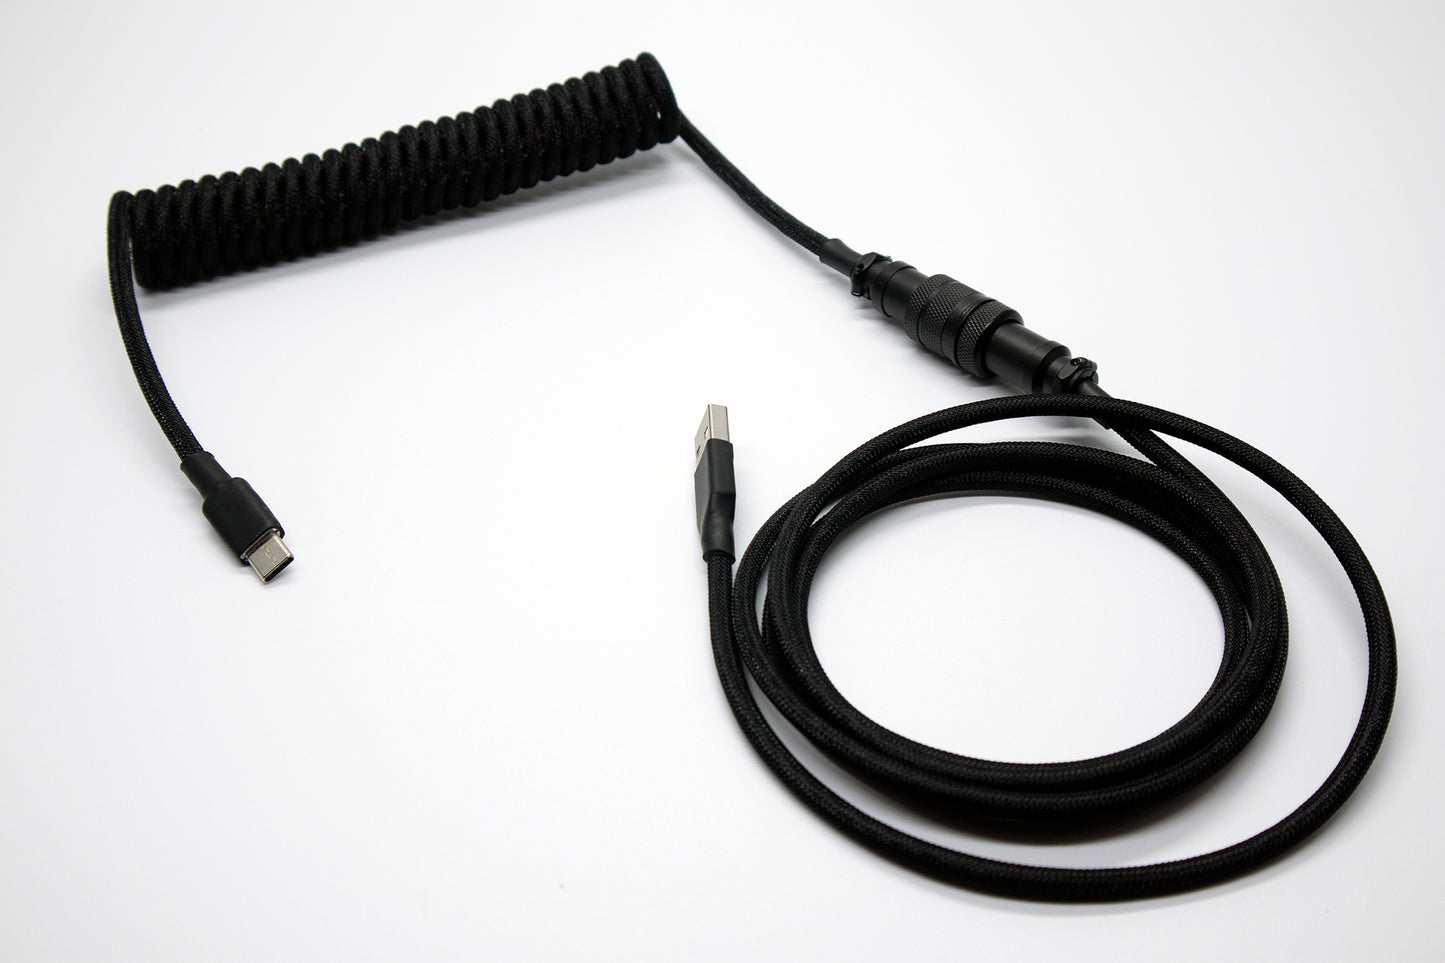 Blackout Coiled Aviator Custom Double Sleeved USB Cables